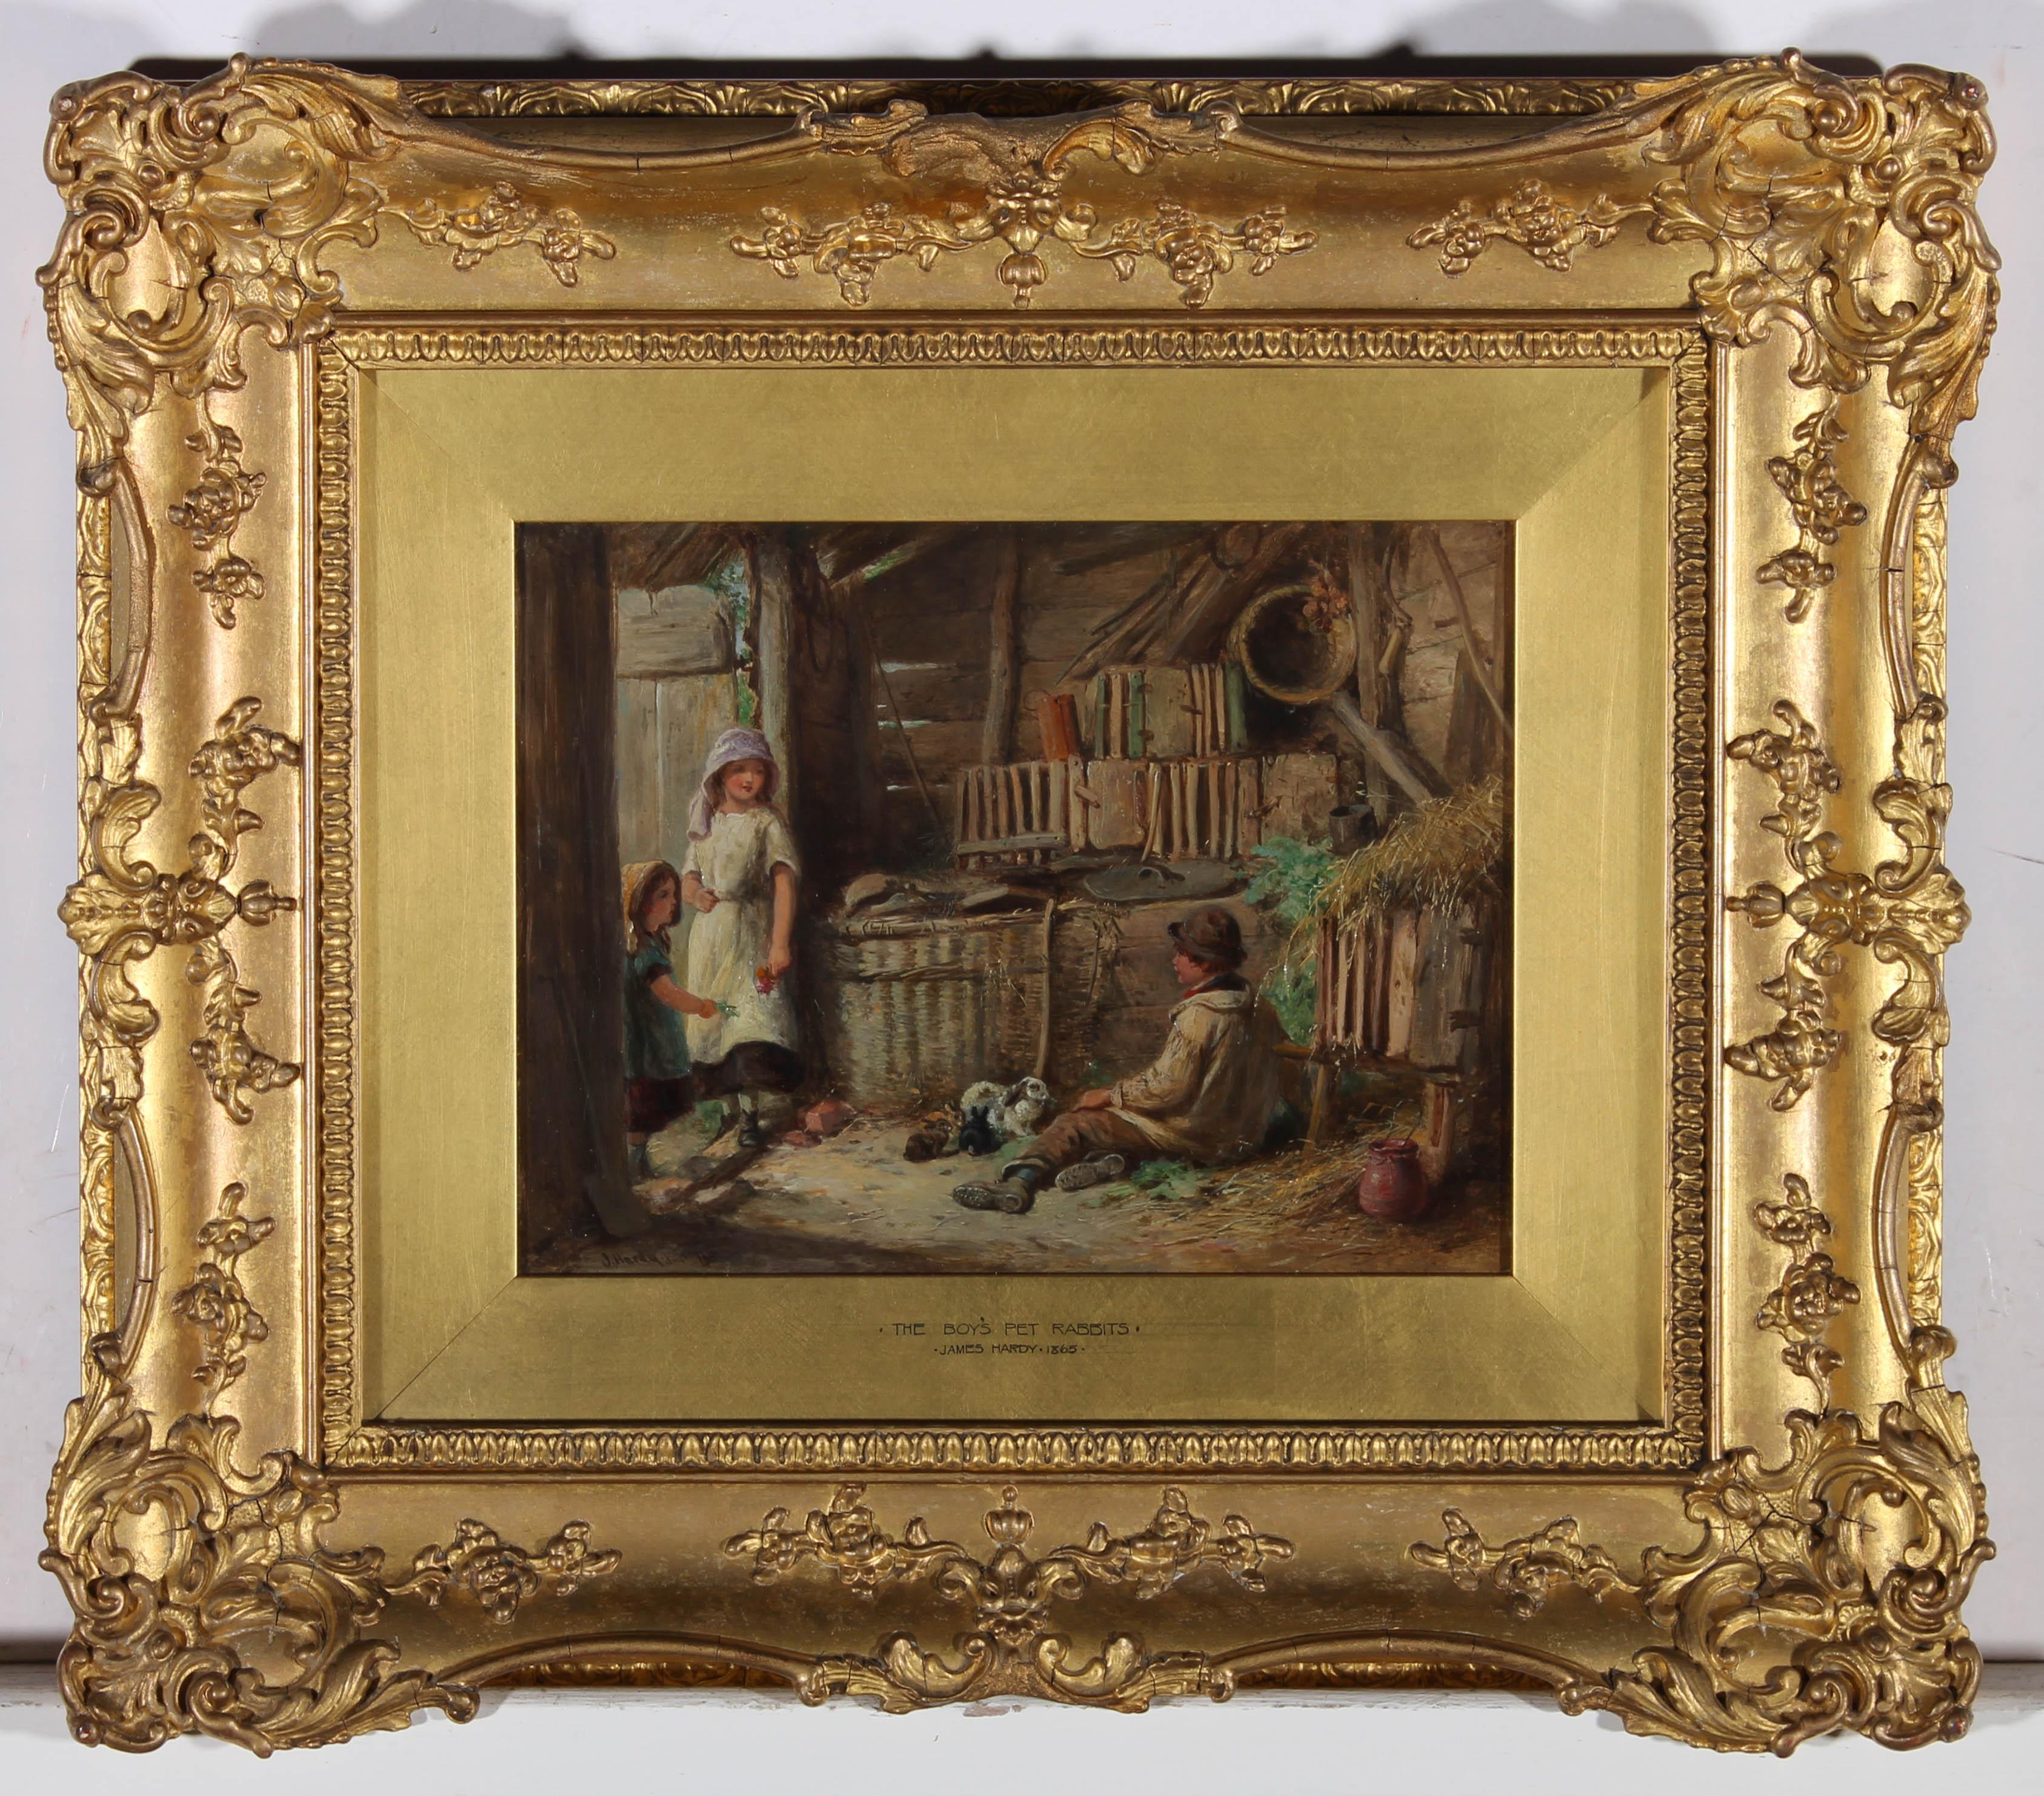 <p>Am exquisite example of the work of the Victorian genre scene painter, Thomas Hardy Junior. The scene shows a barn interior, with a young boy seated on the hay strewn floor, with his pet rabbits. Two little girls stand in the doorway, curiously